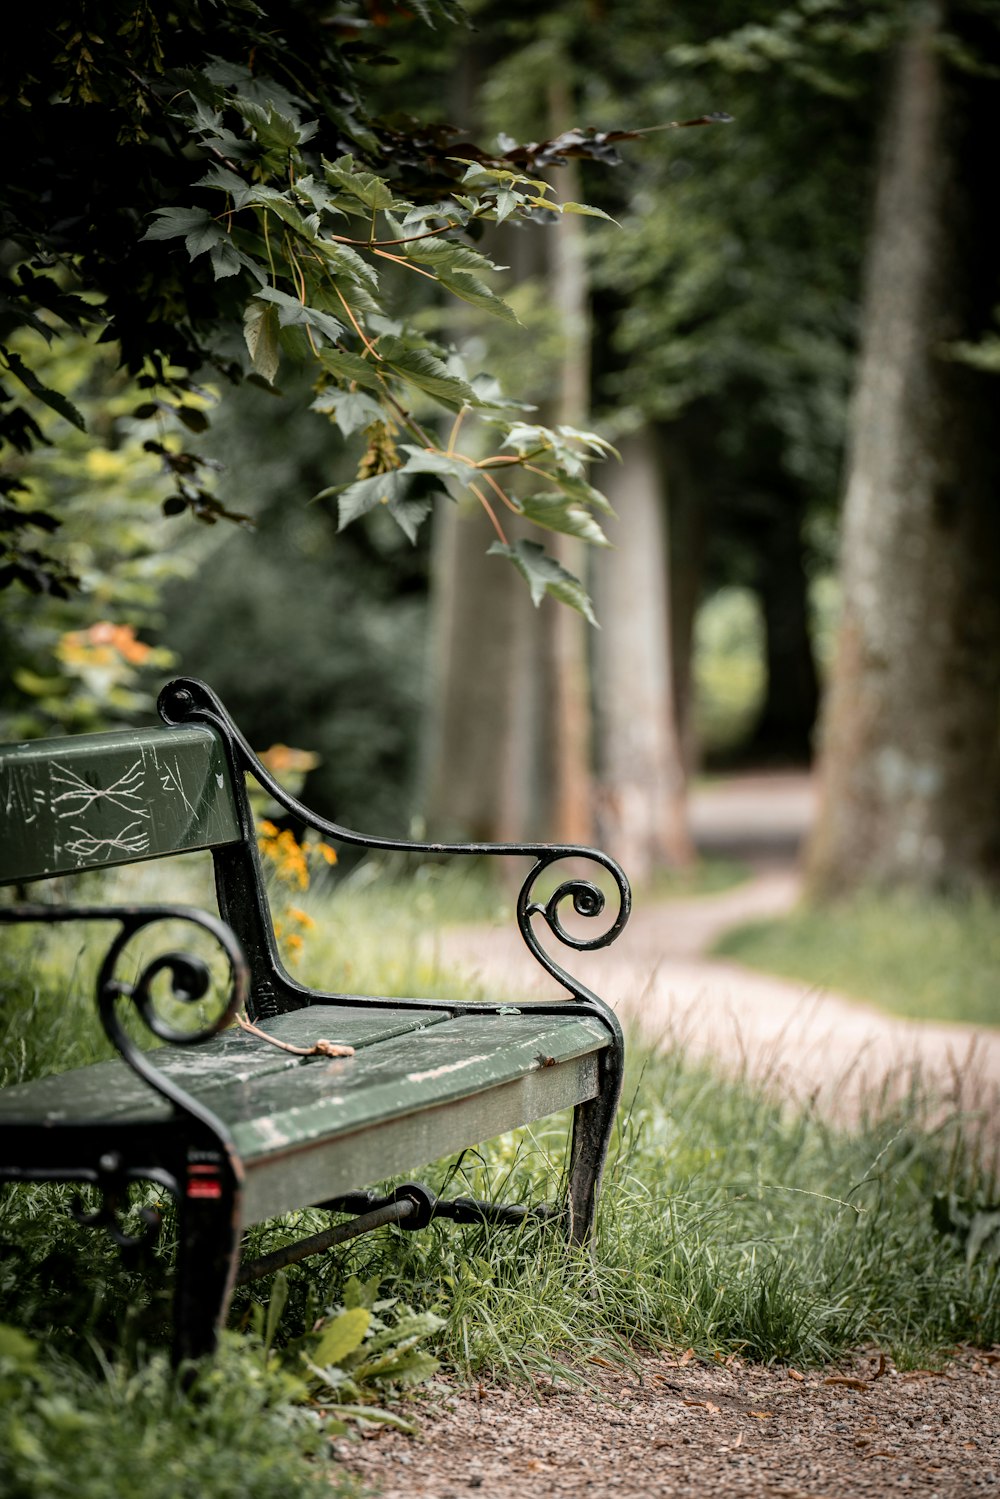 350+ Park Bench Pictures [HQ] | Download Free Images & Stock Photos on  Unsplash